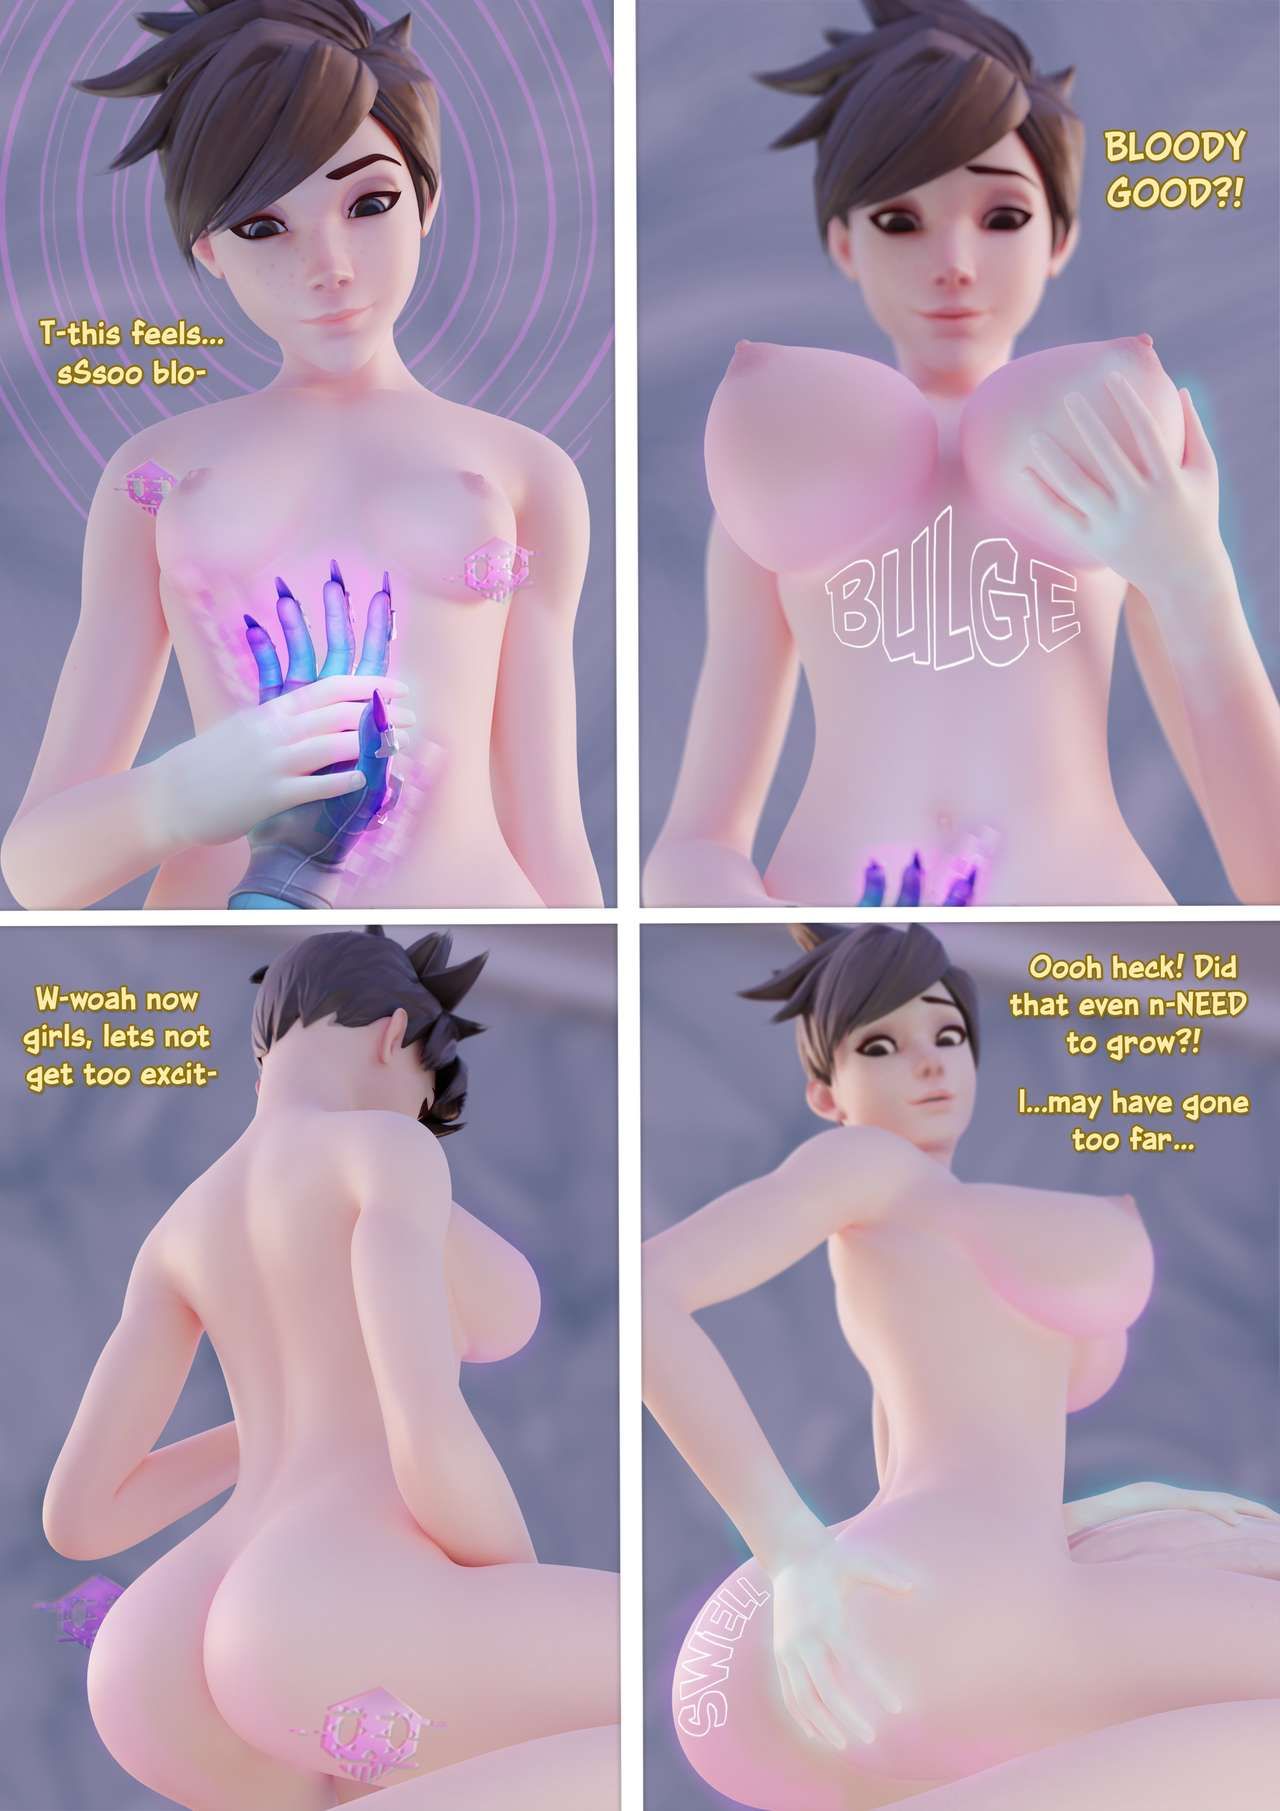 [Chainsmok3r] Tracer's No Nut November (Ongoing) 60